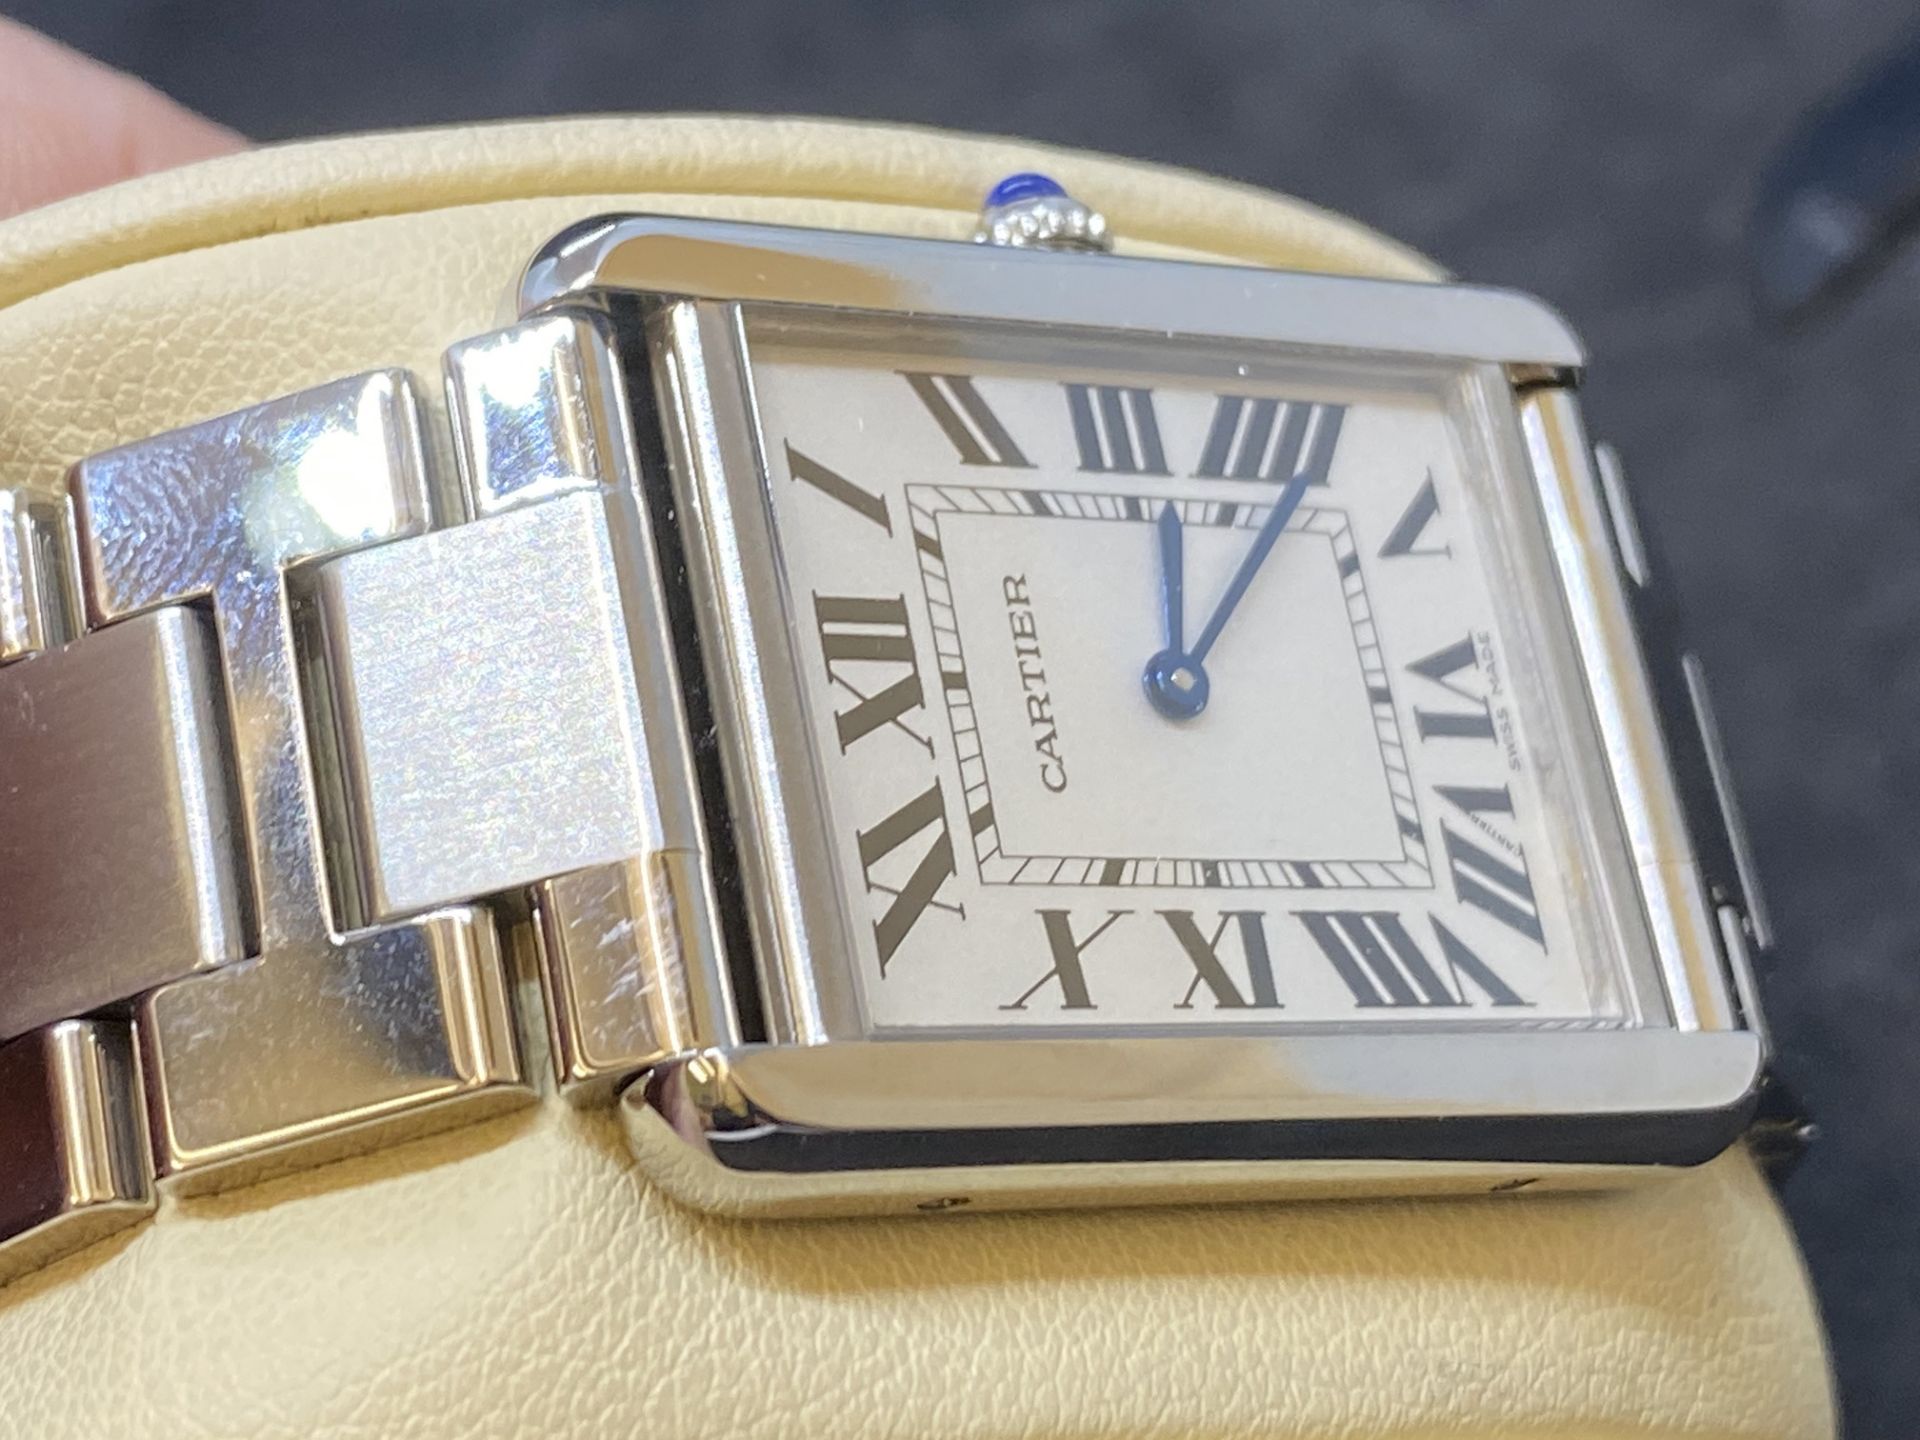 CARTIER TANK STAINLESS STEEL WATCH - Image 3 of 8